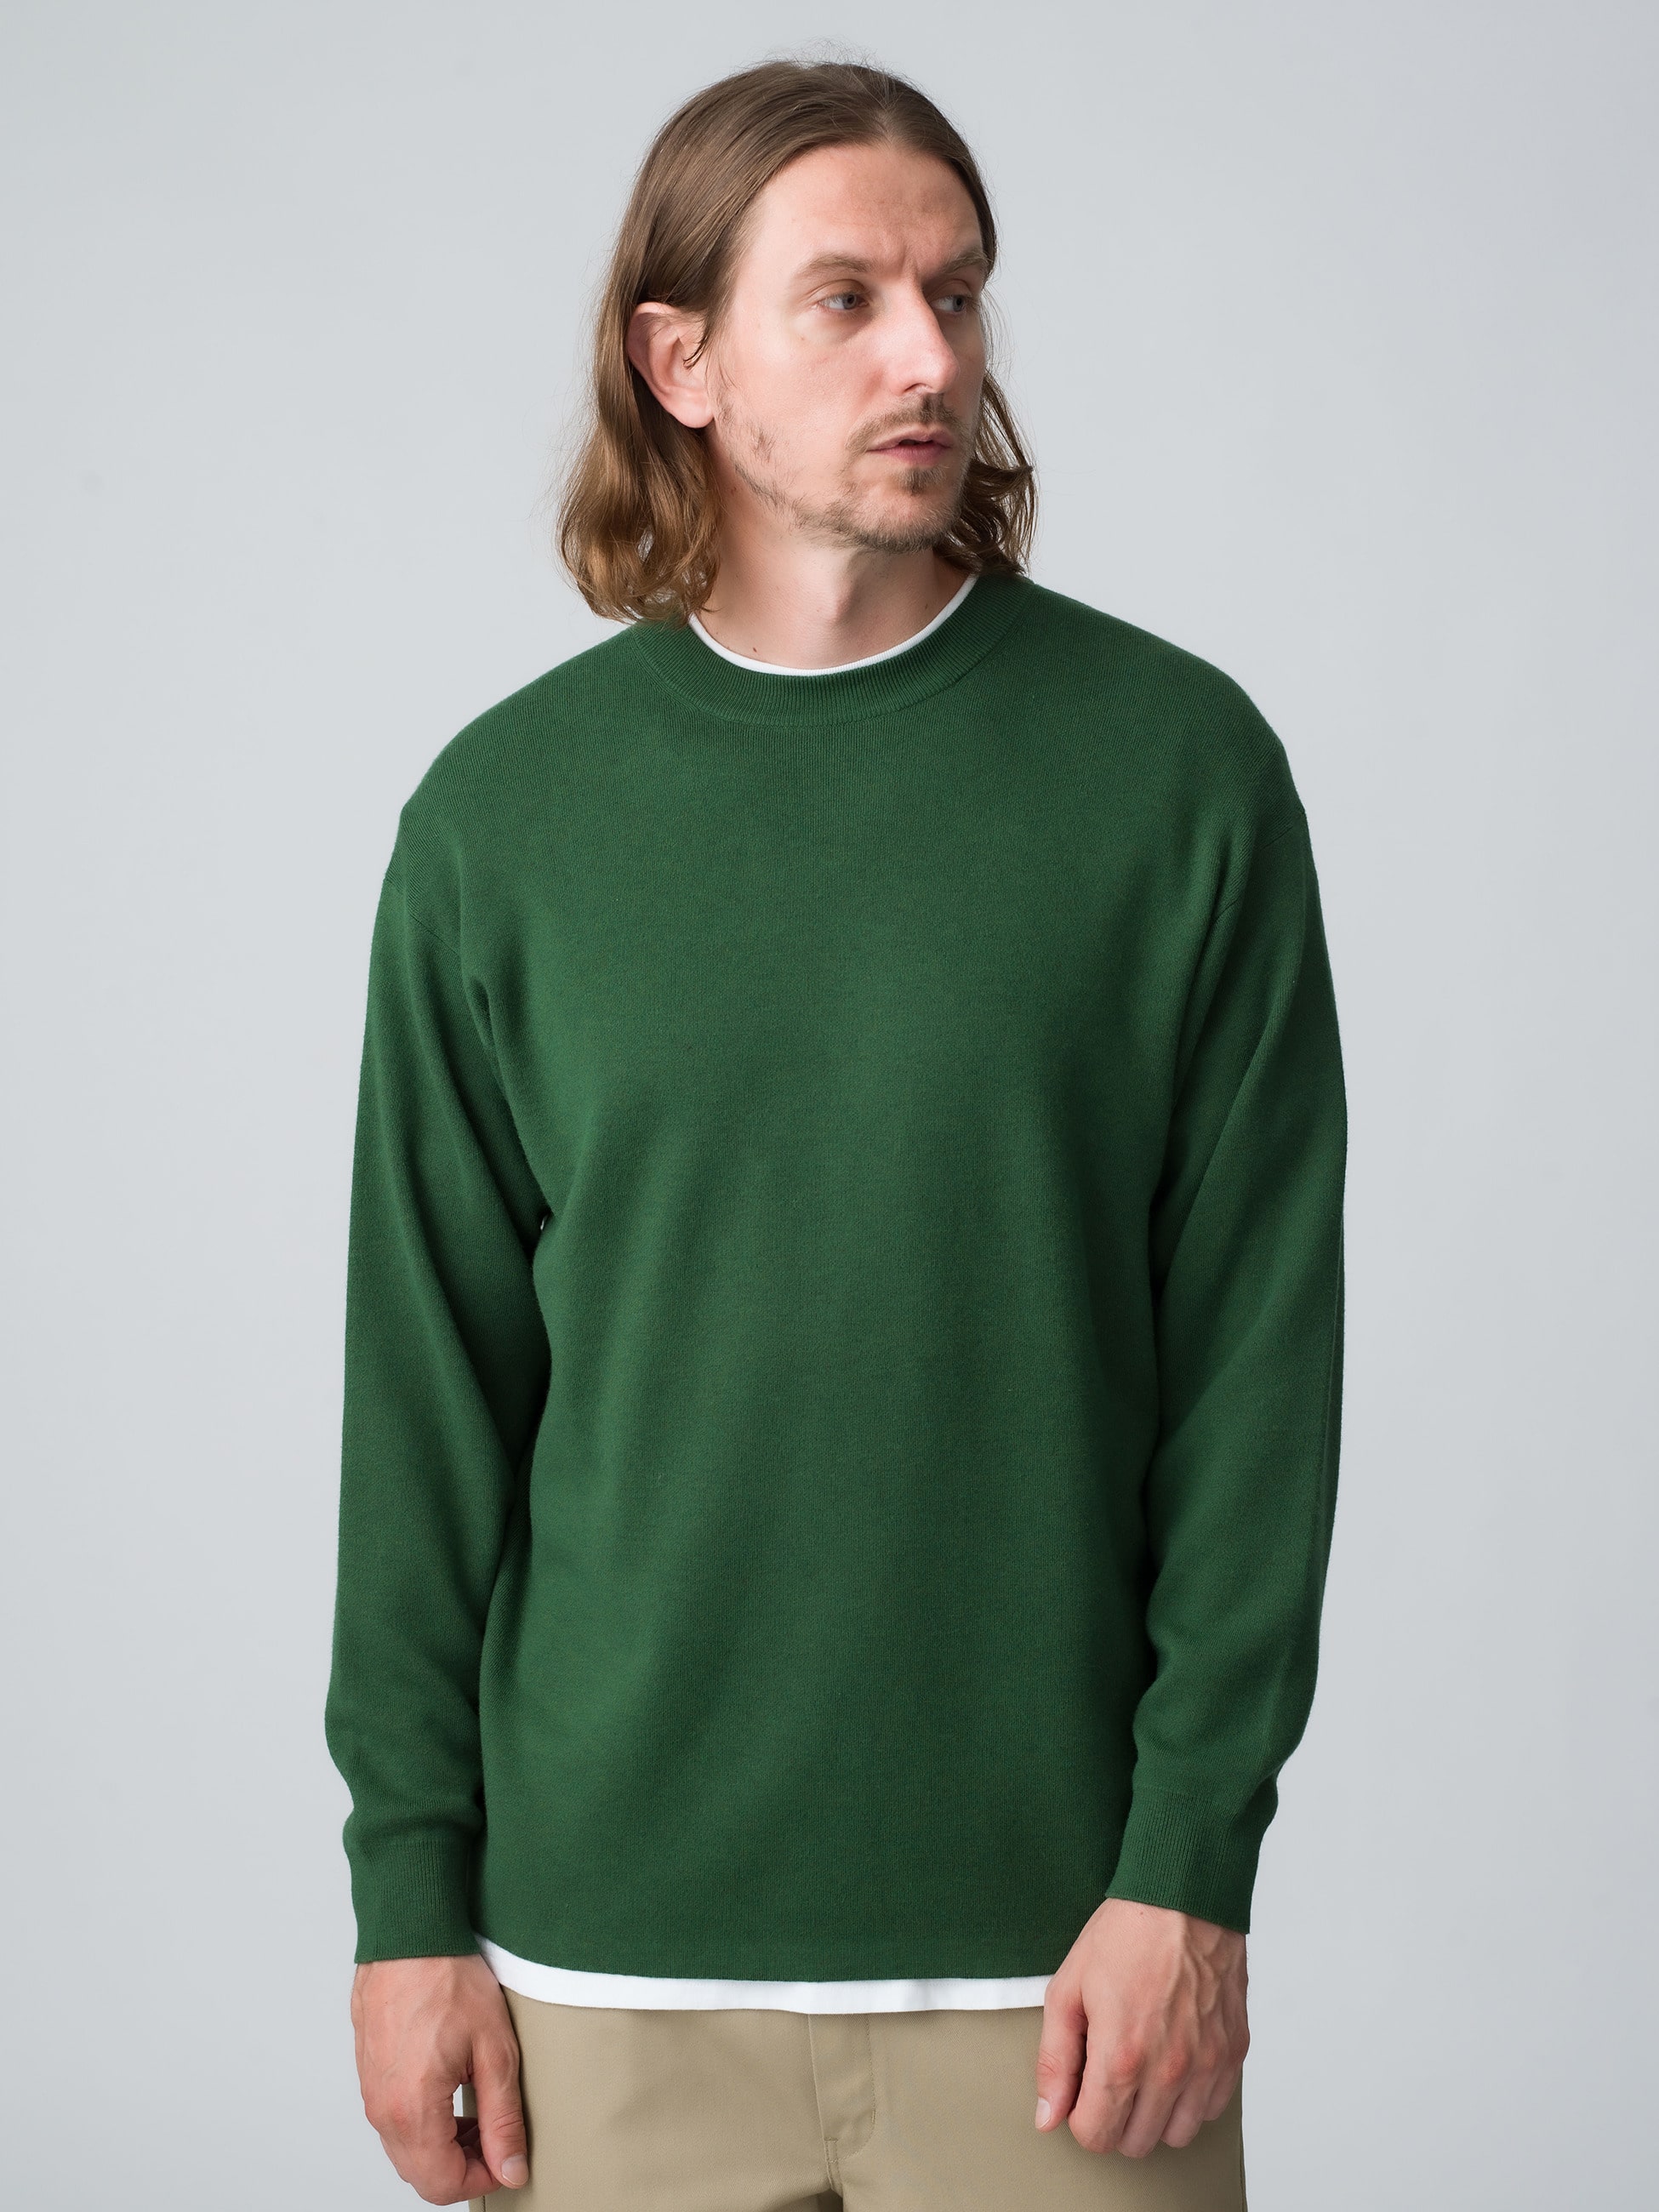 Cotton Cashmere Smooth Knit Pullover